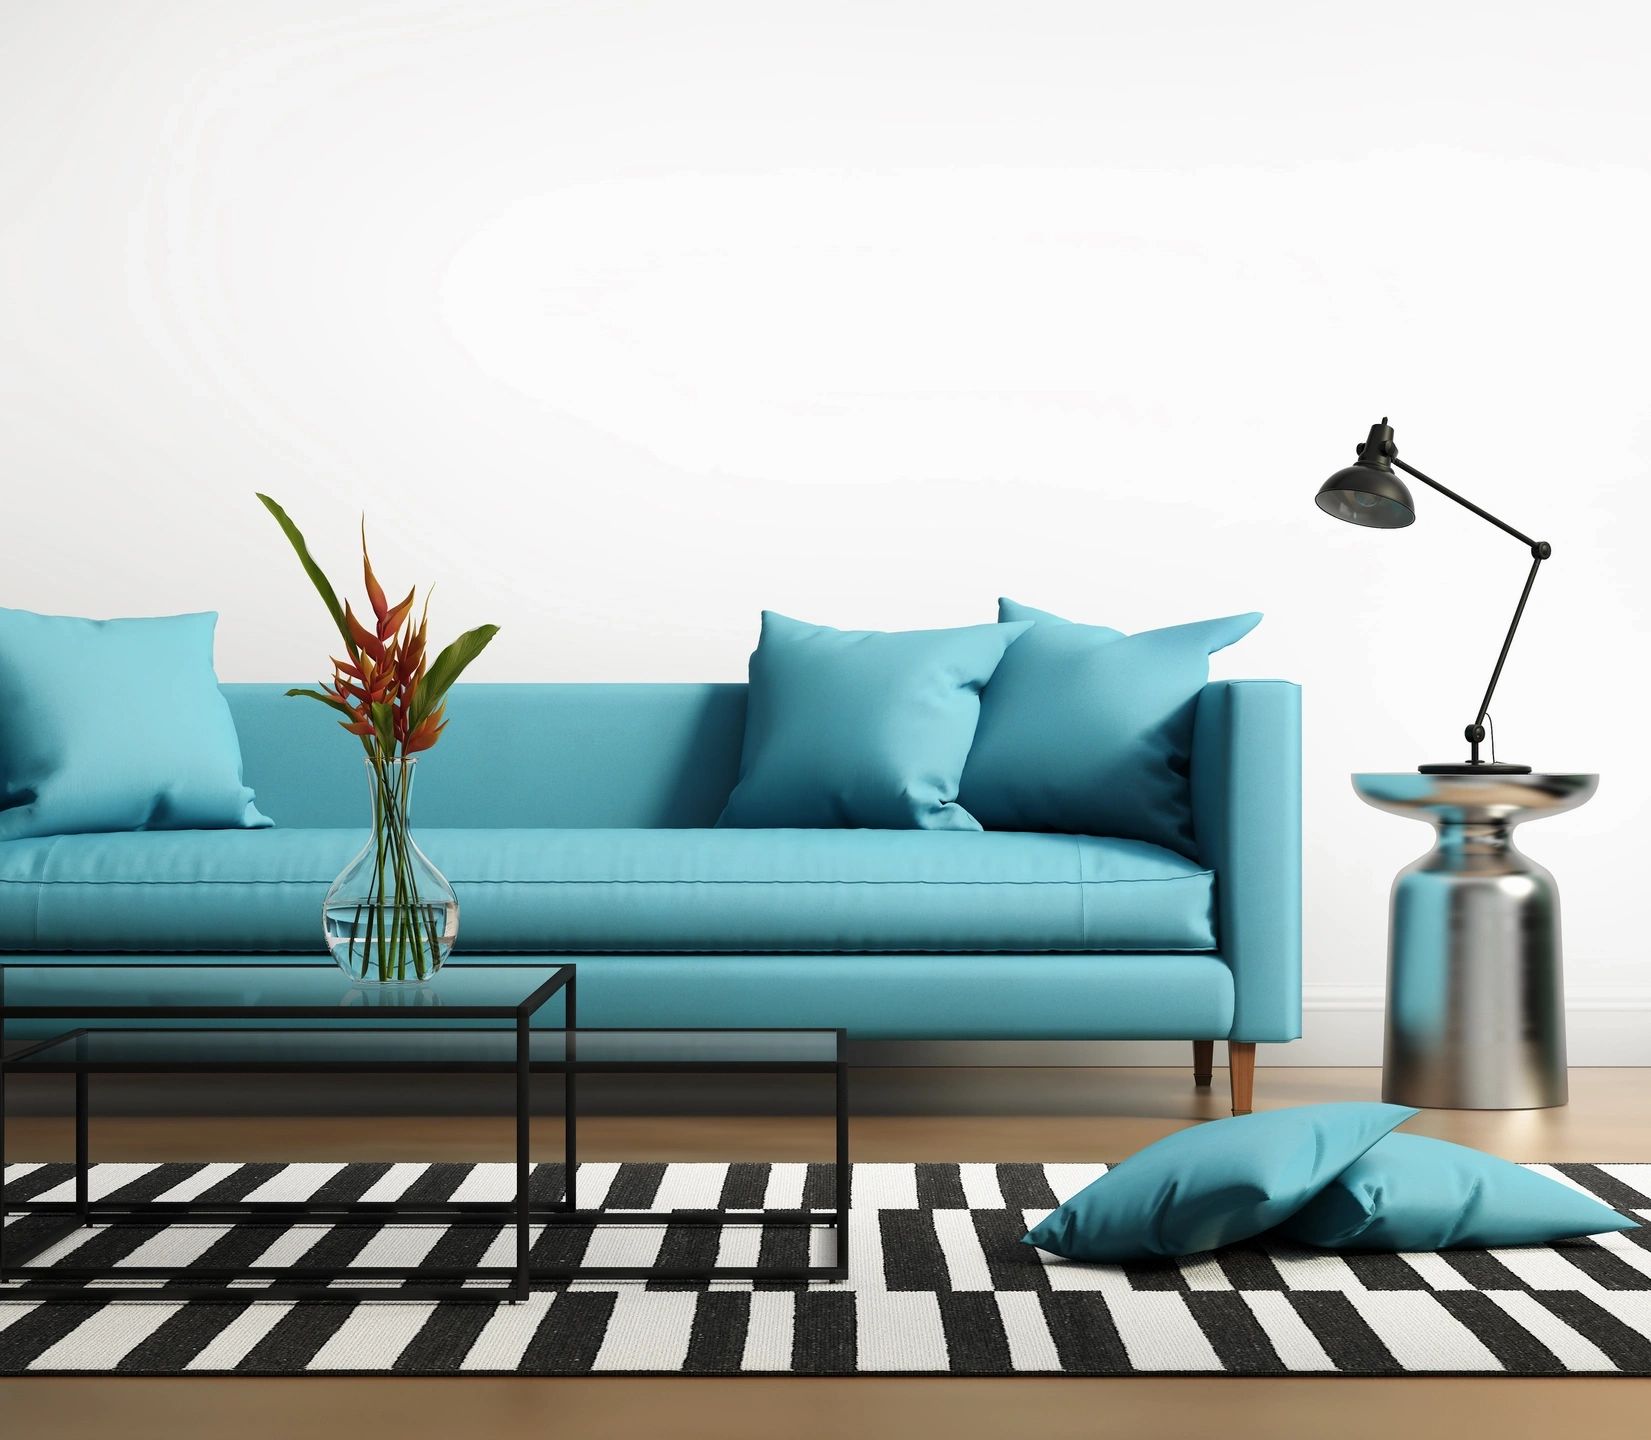 Renew Home Furnishings - Reupholstery in Richmond